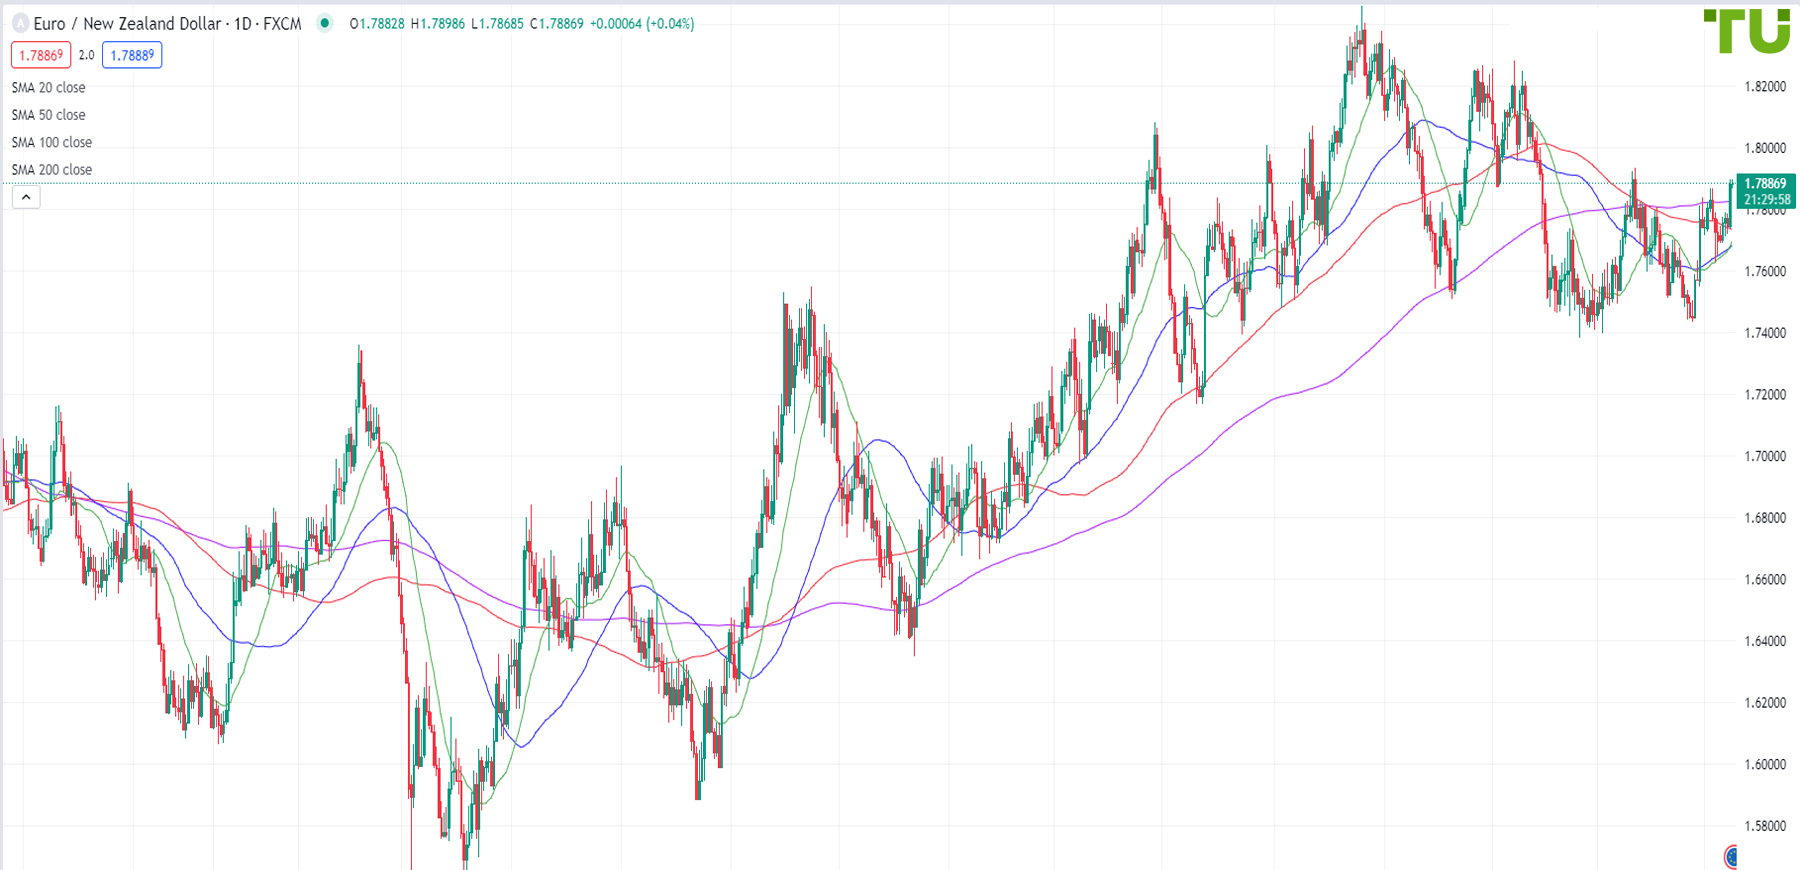 Euro/Kiwi is approaching strong resistance; correction risks are growing